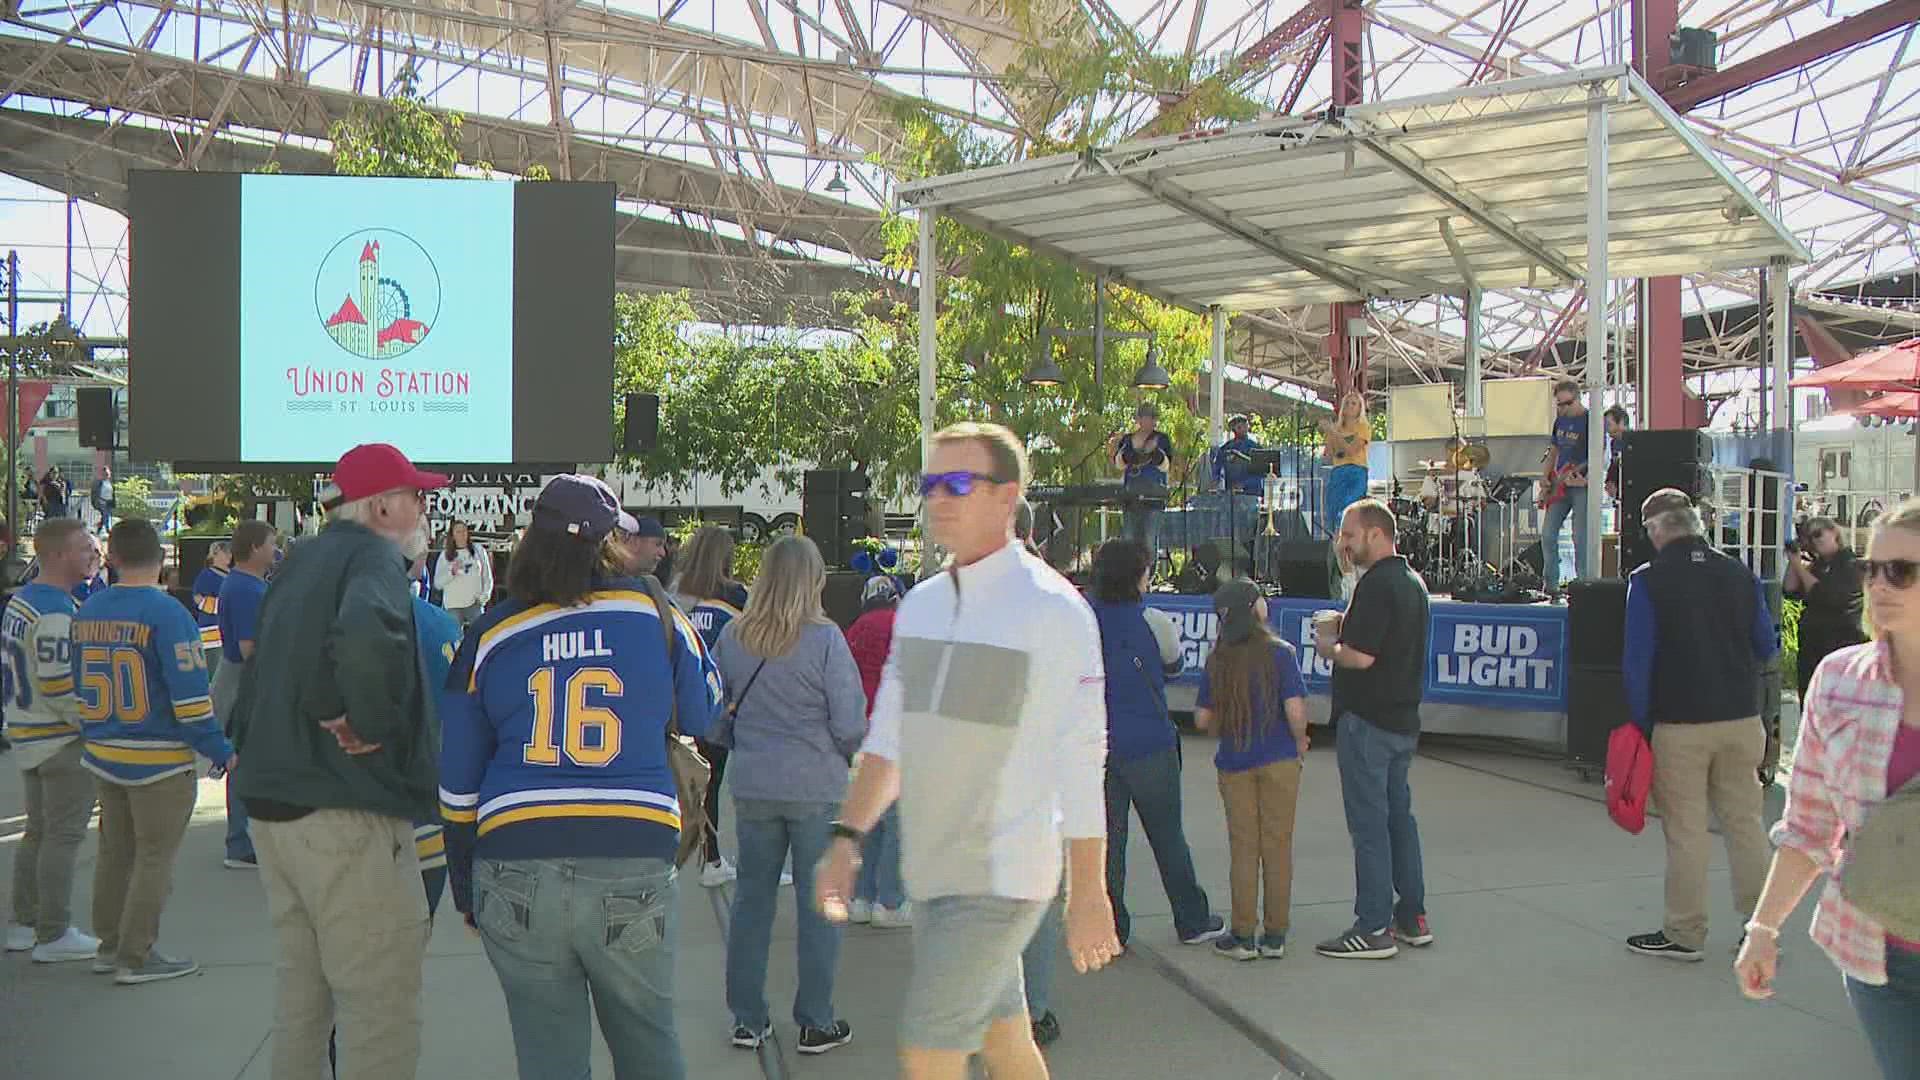 The event started at 3 p.m. and included a line-up of live music and appearances by Blues broadcasters. Blues won their first game against the Blue Jackets.